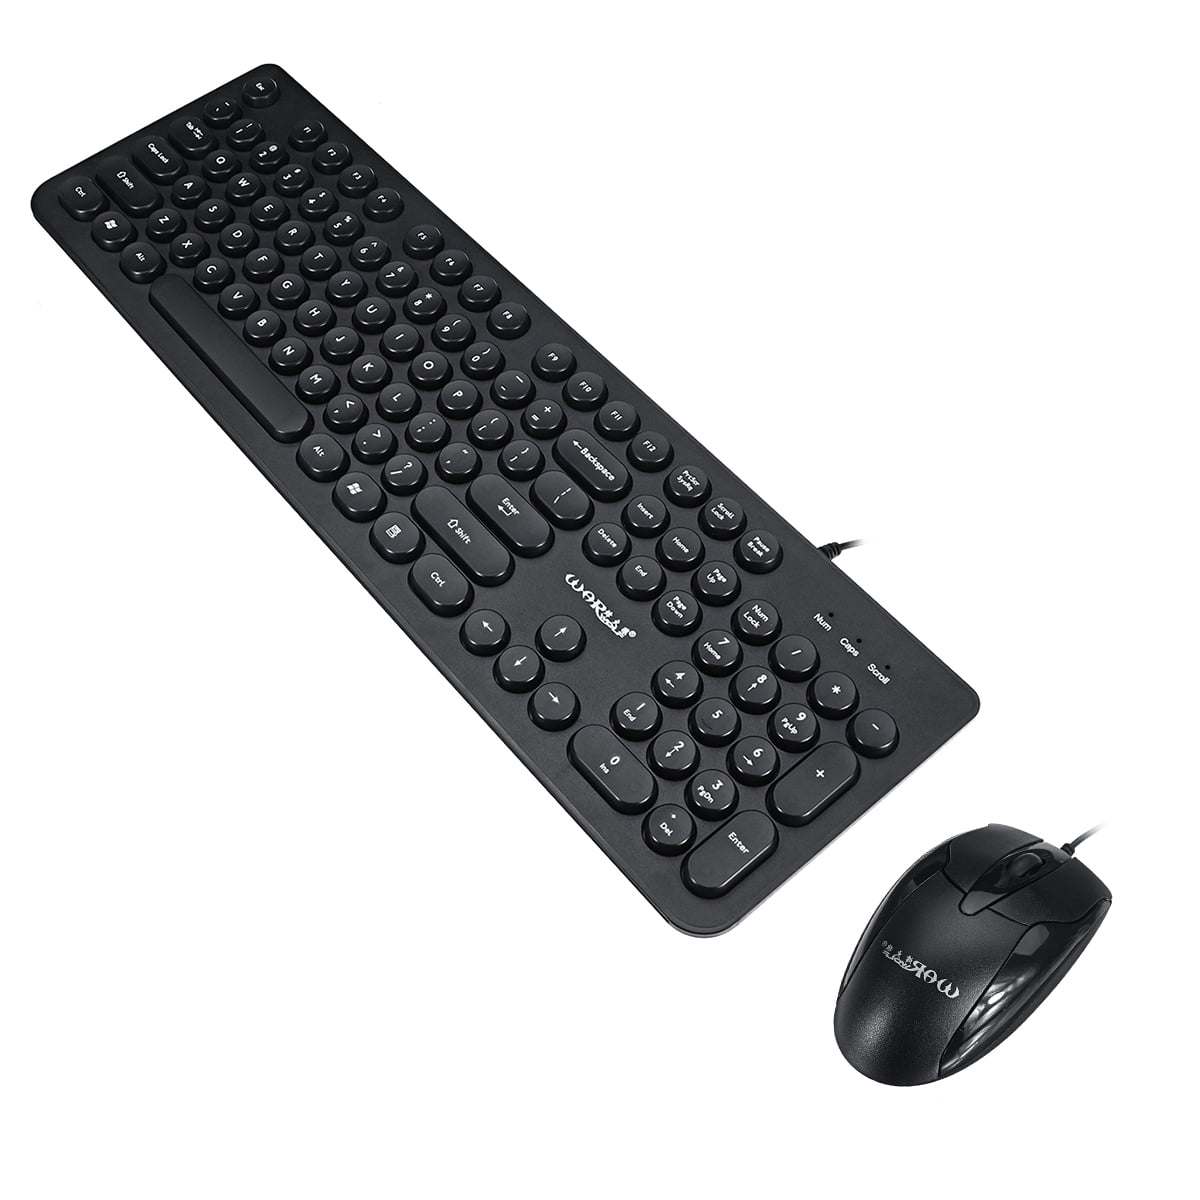 Keyboard Mouse Set Computer Keyboard Notebook Keyboard Wired and Wireless Black-Wired 